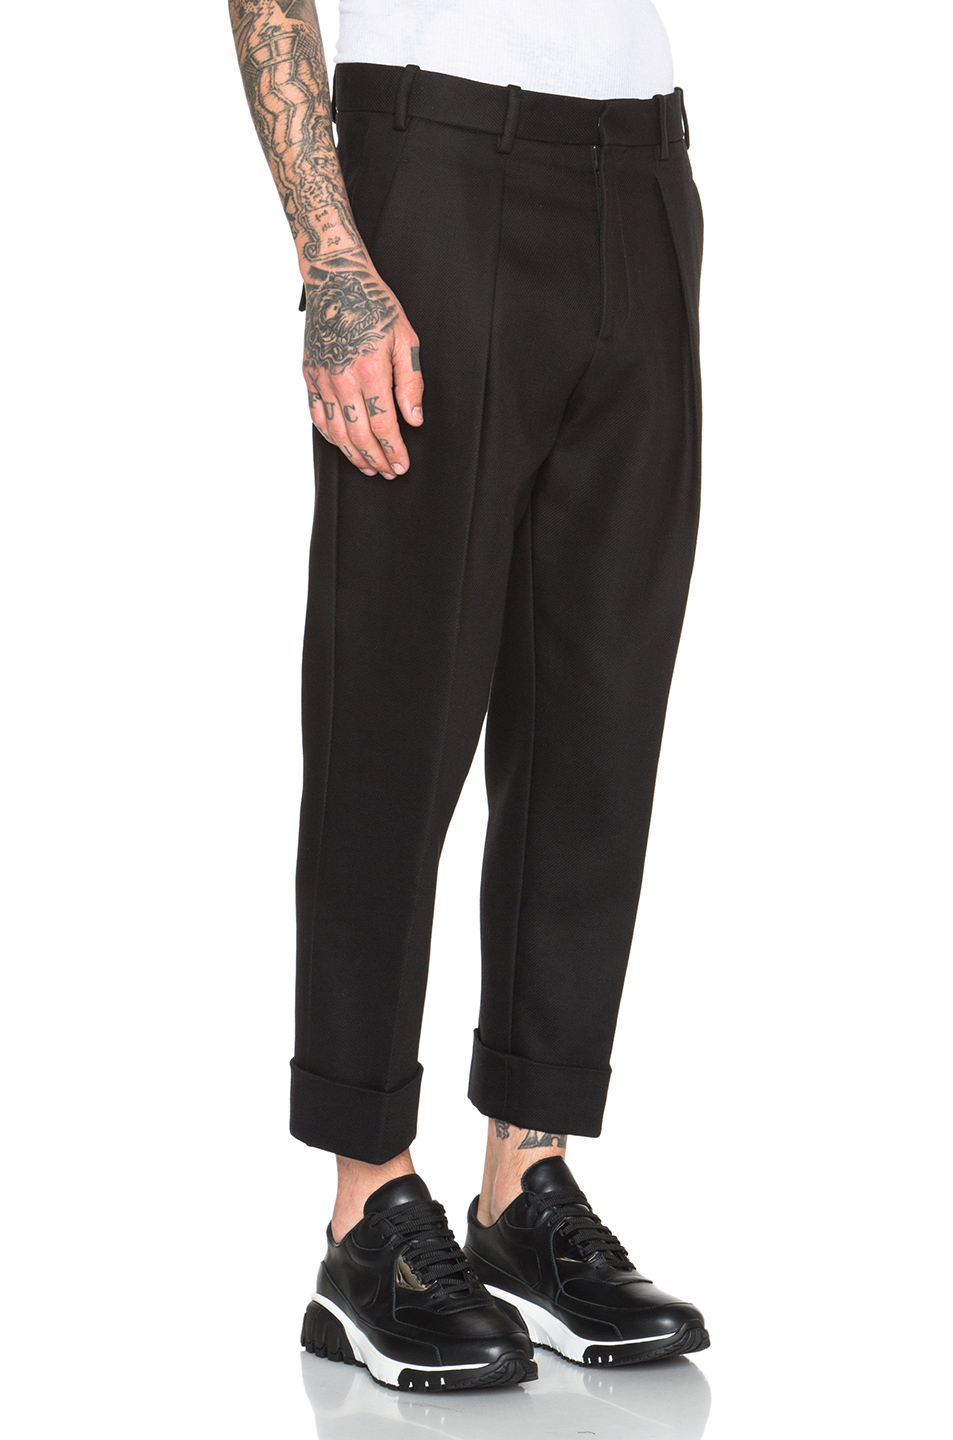 mens turn up trousers - ShopStyle UK